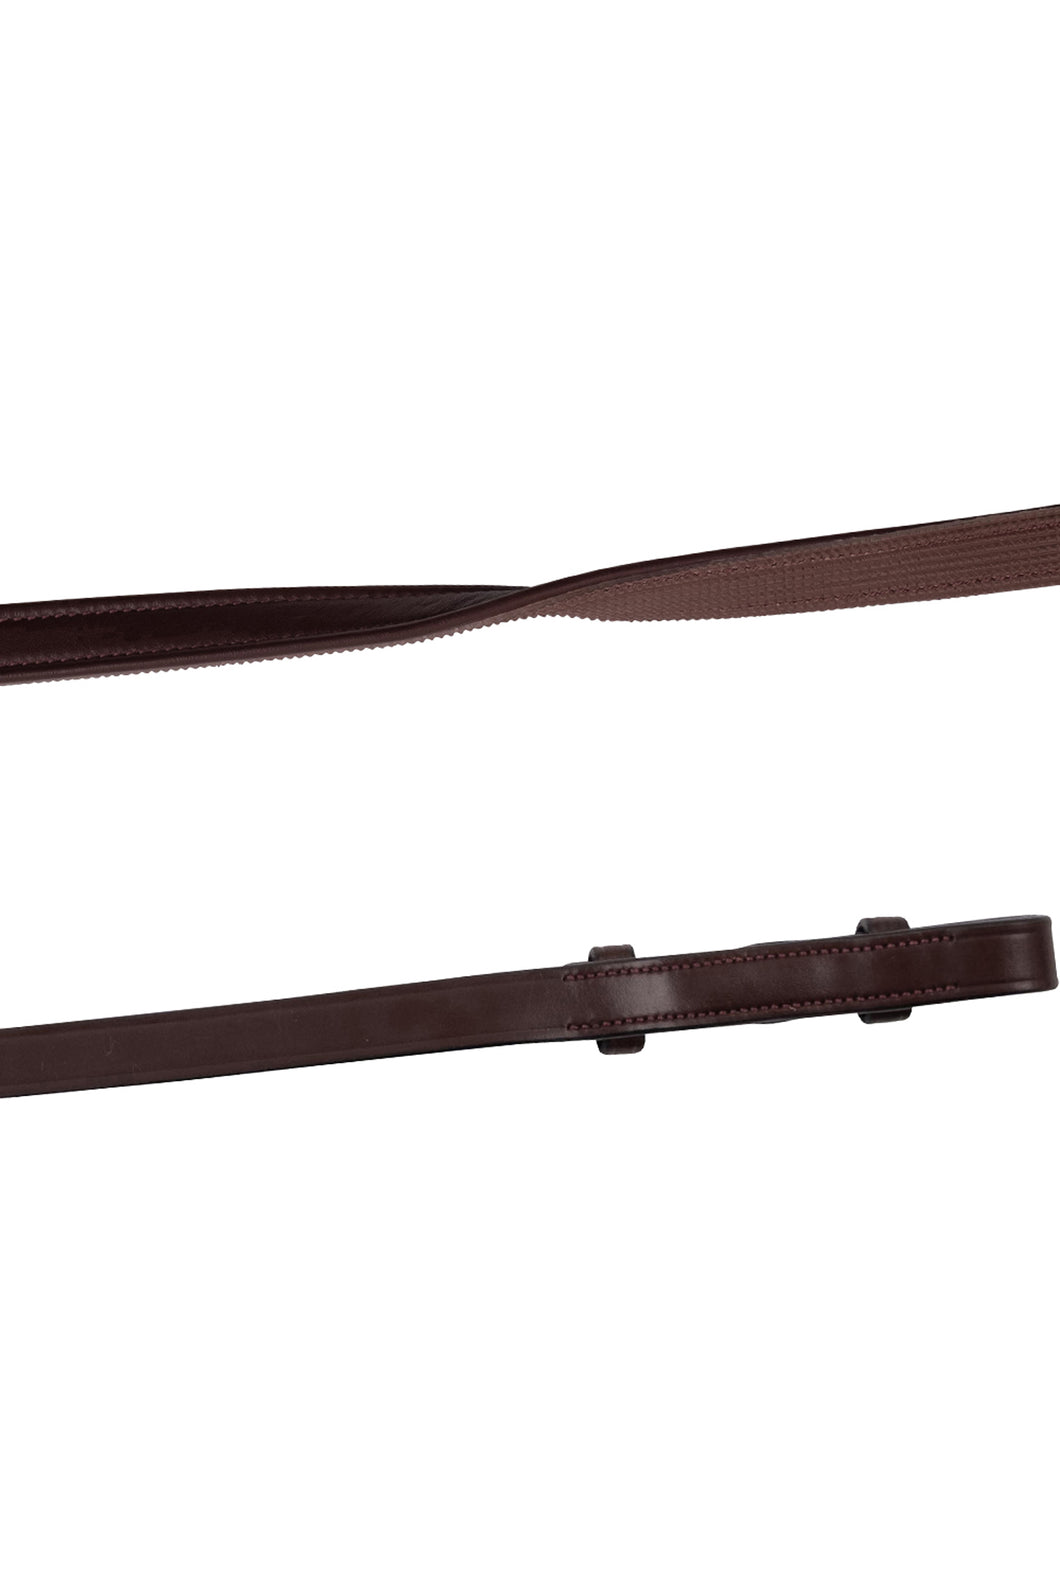 Smooth Leather/Rubber Reins - Brown with French Hooks